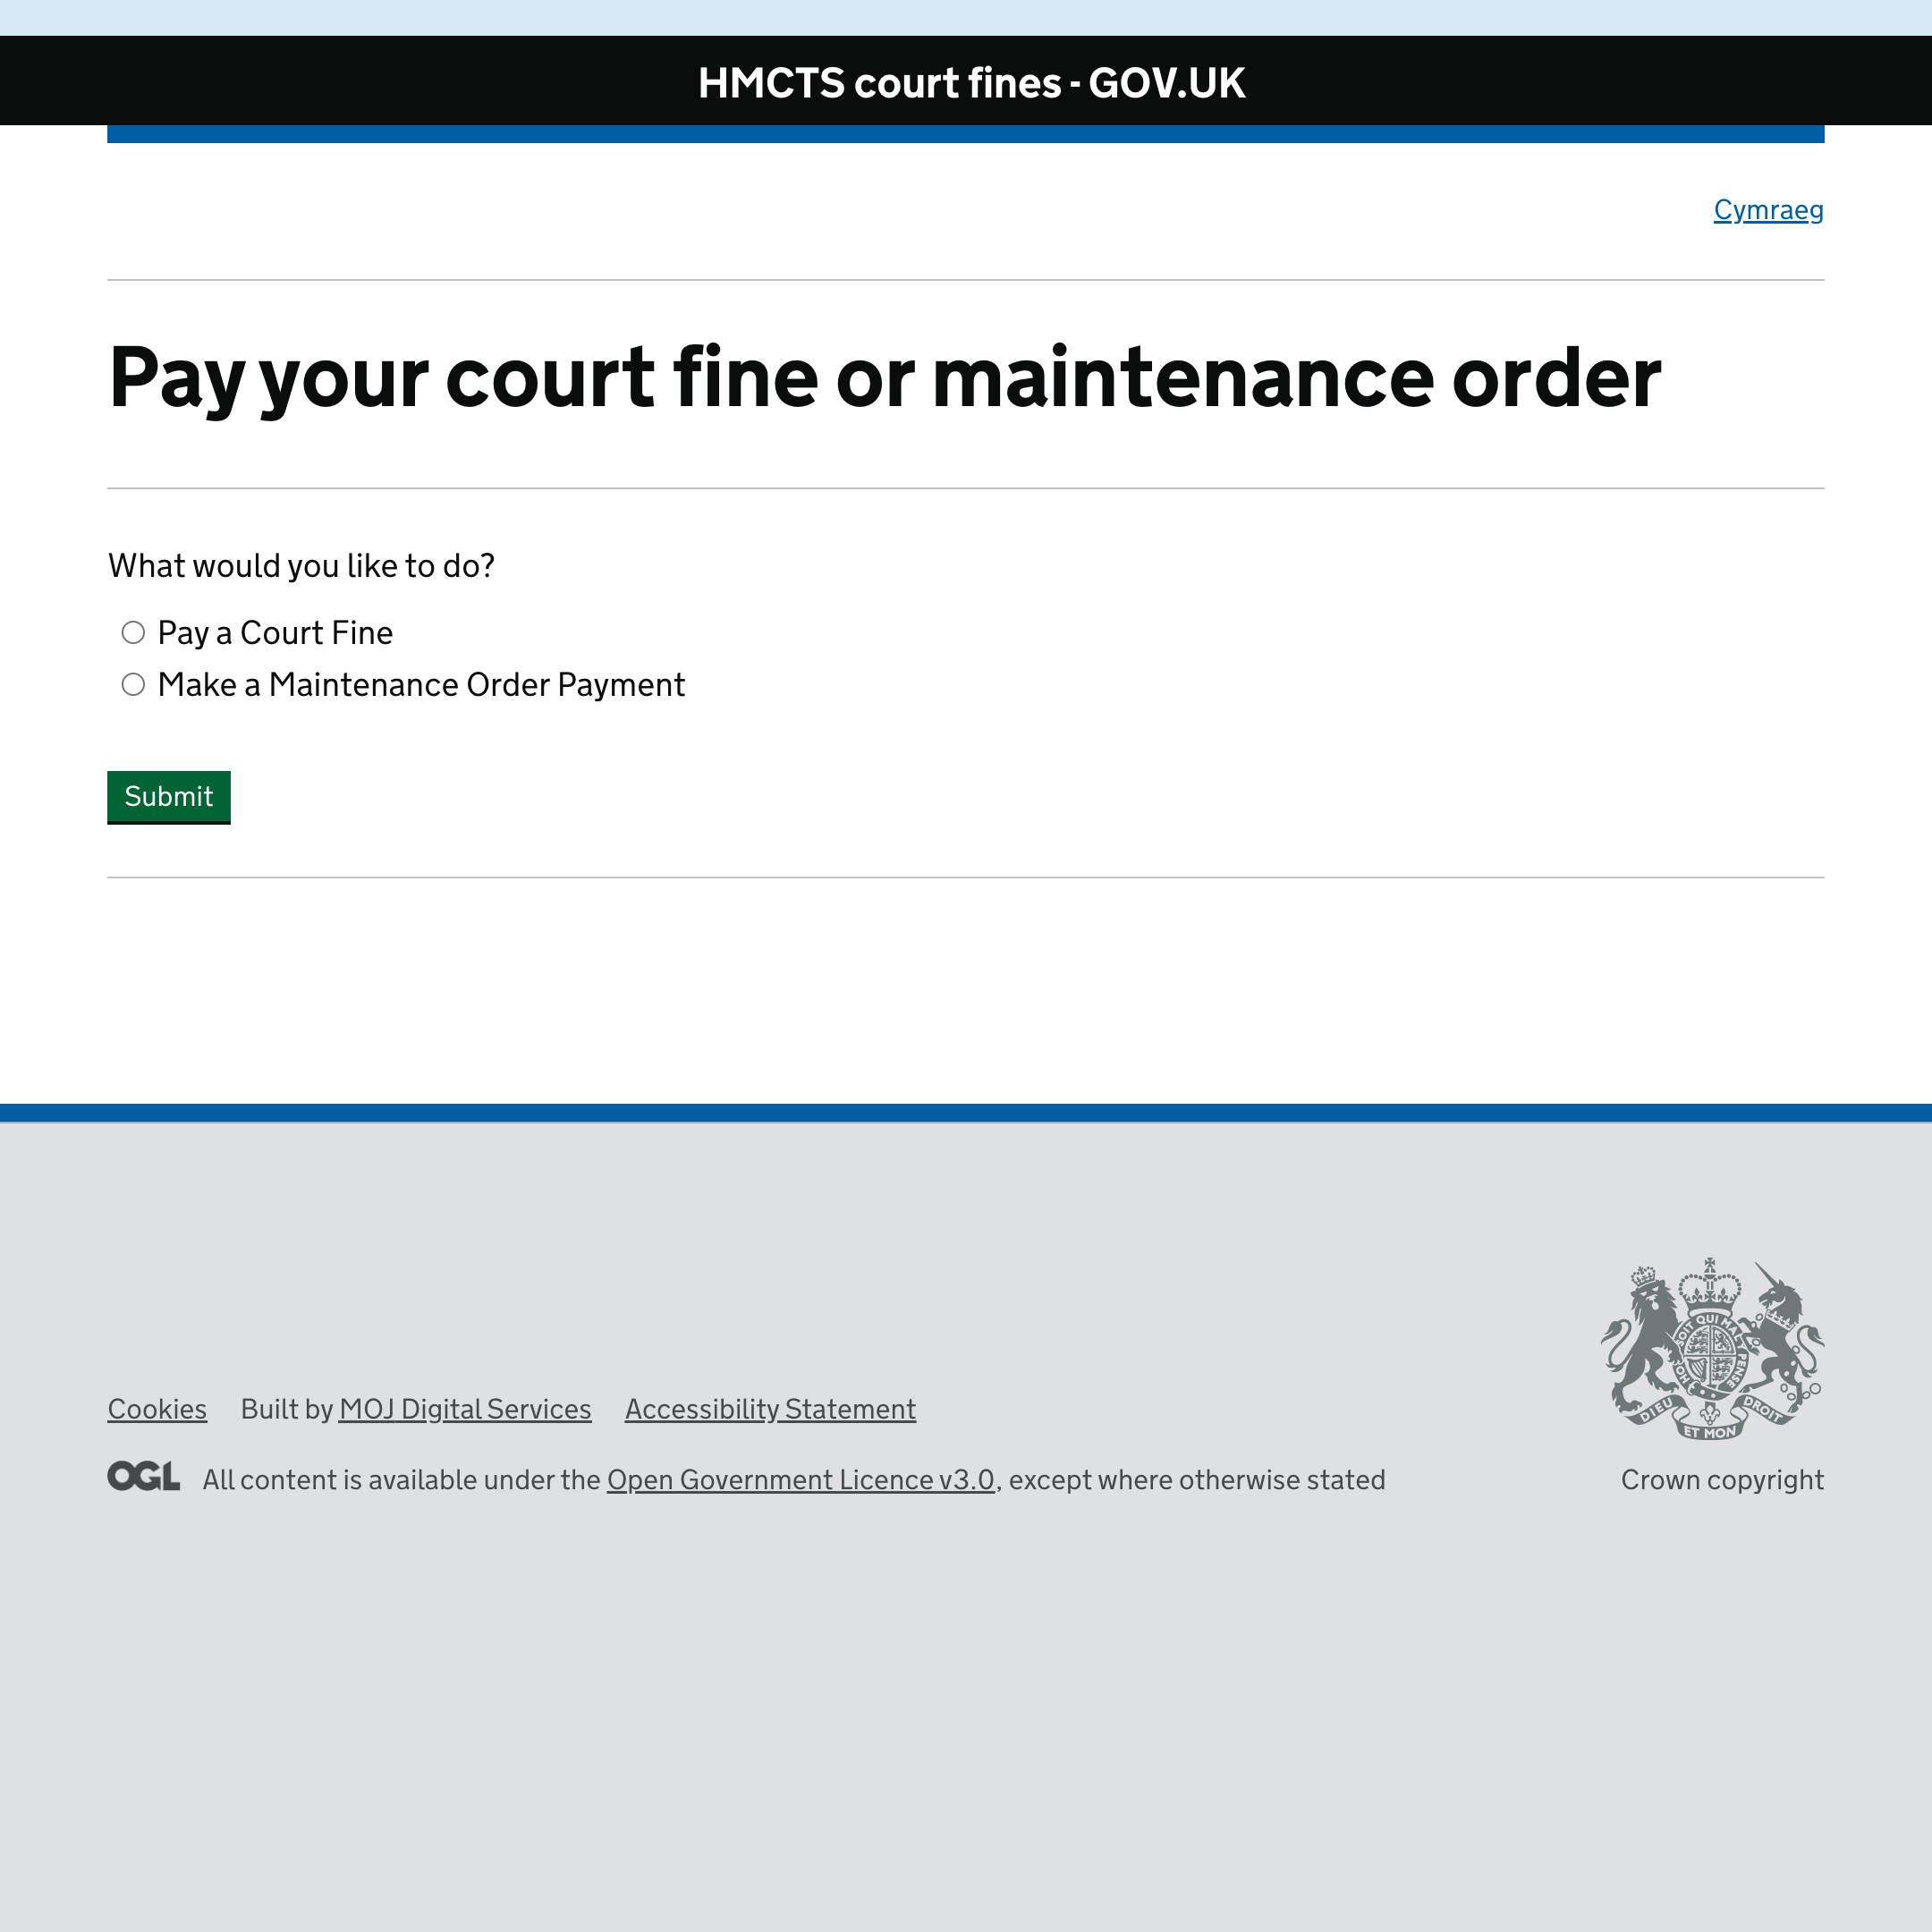 Pay your court fine or maintenance order